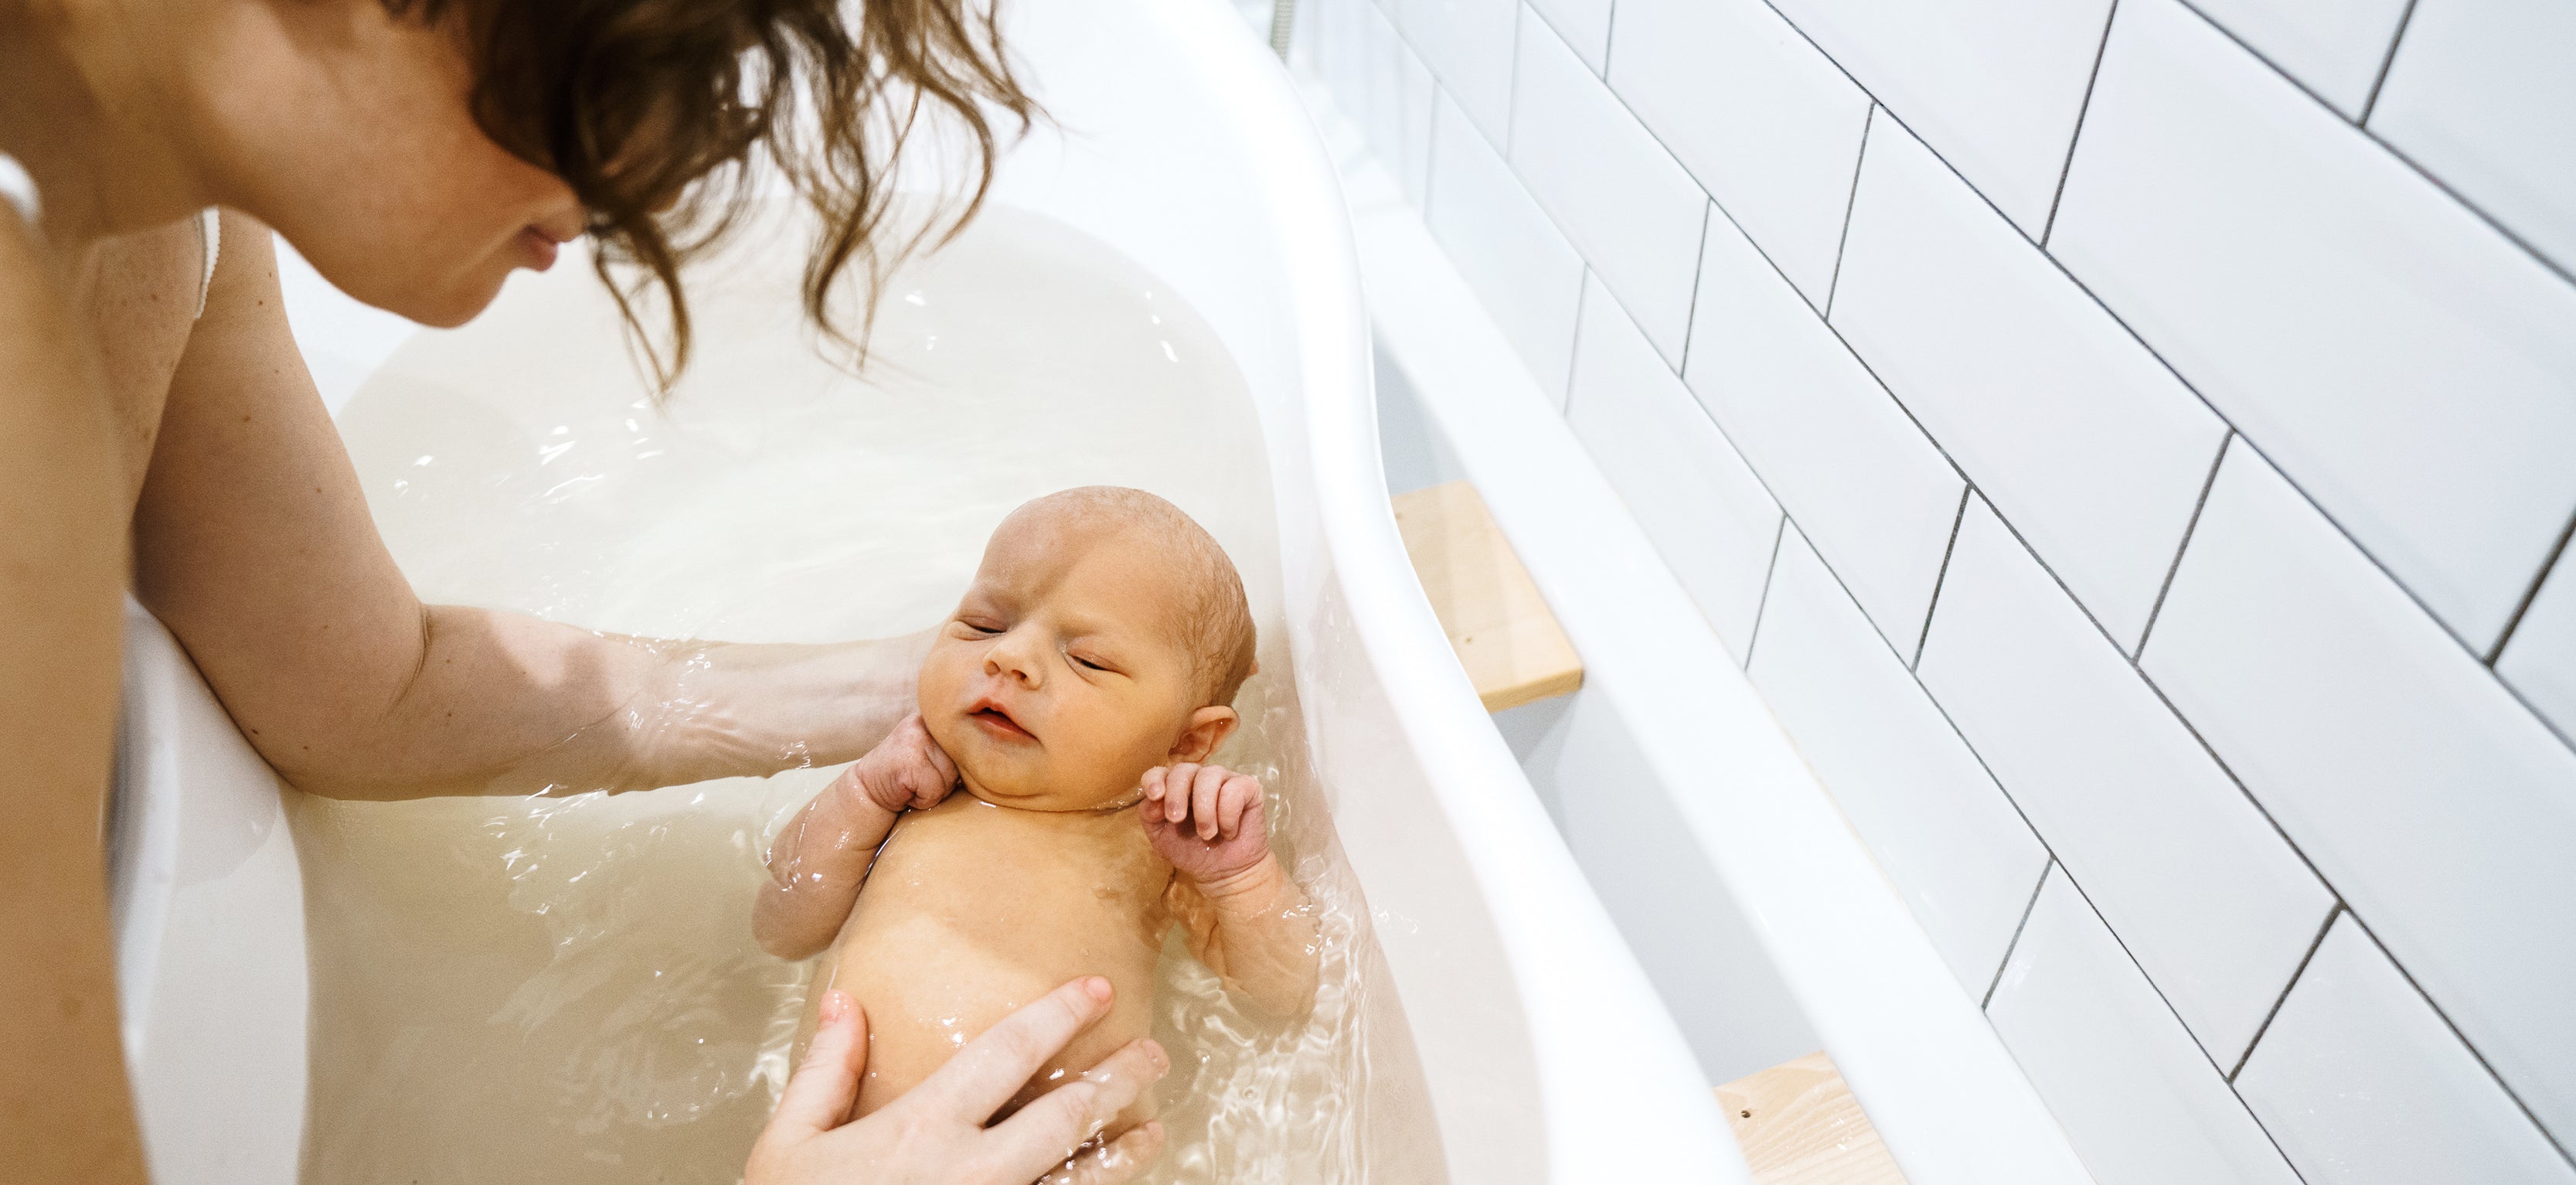 Midwife Cath: Tips for Bathing Your Baby BodyICE Australia